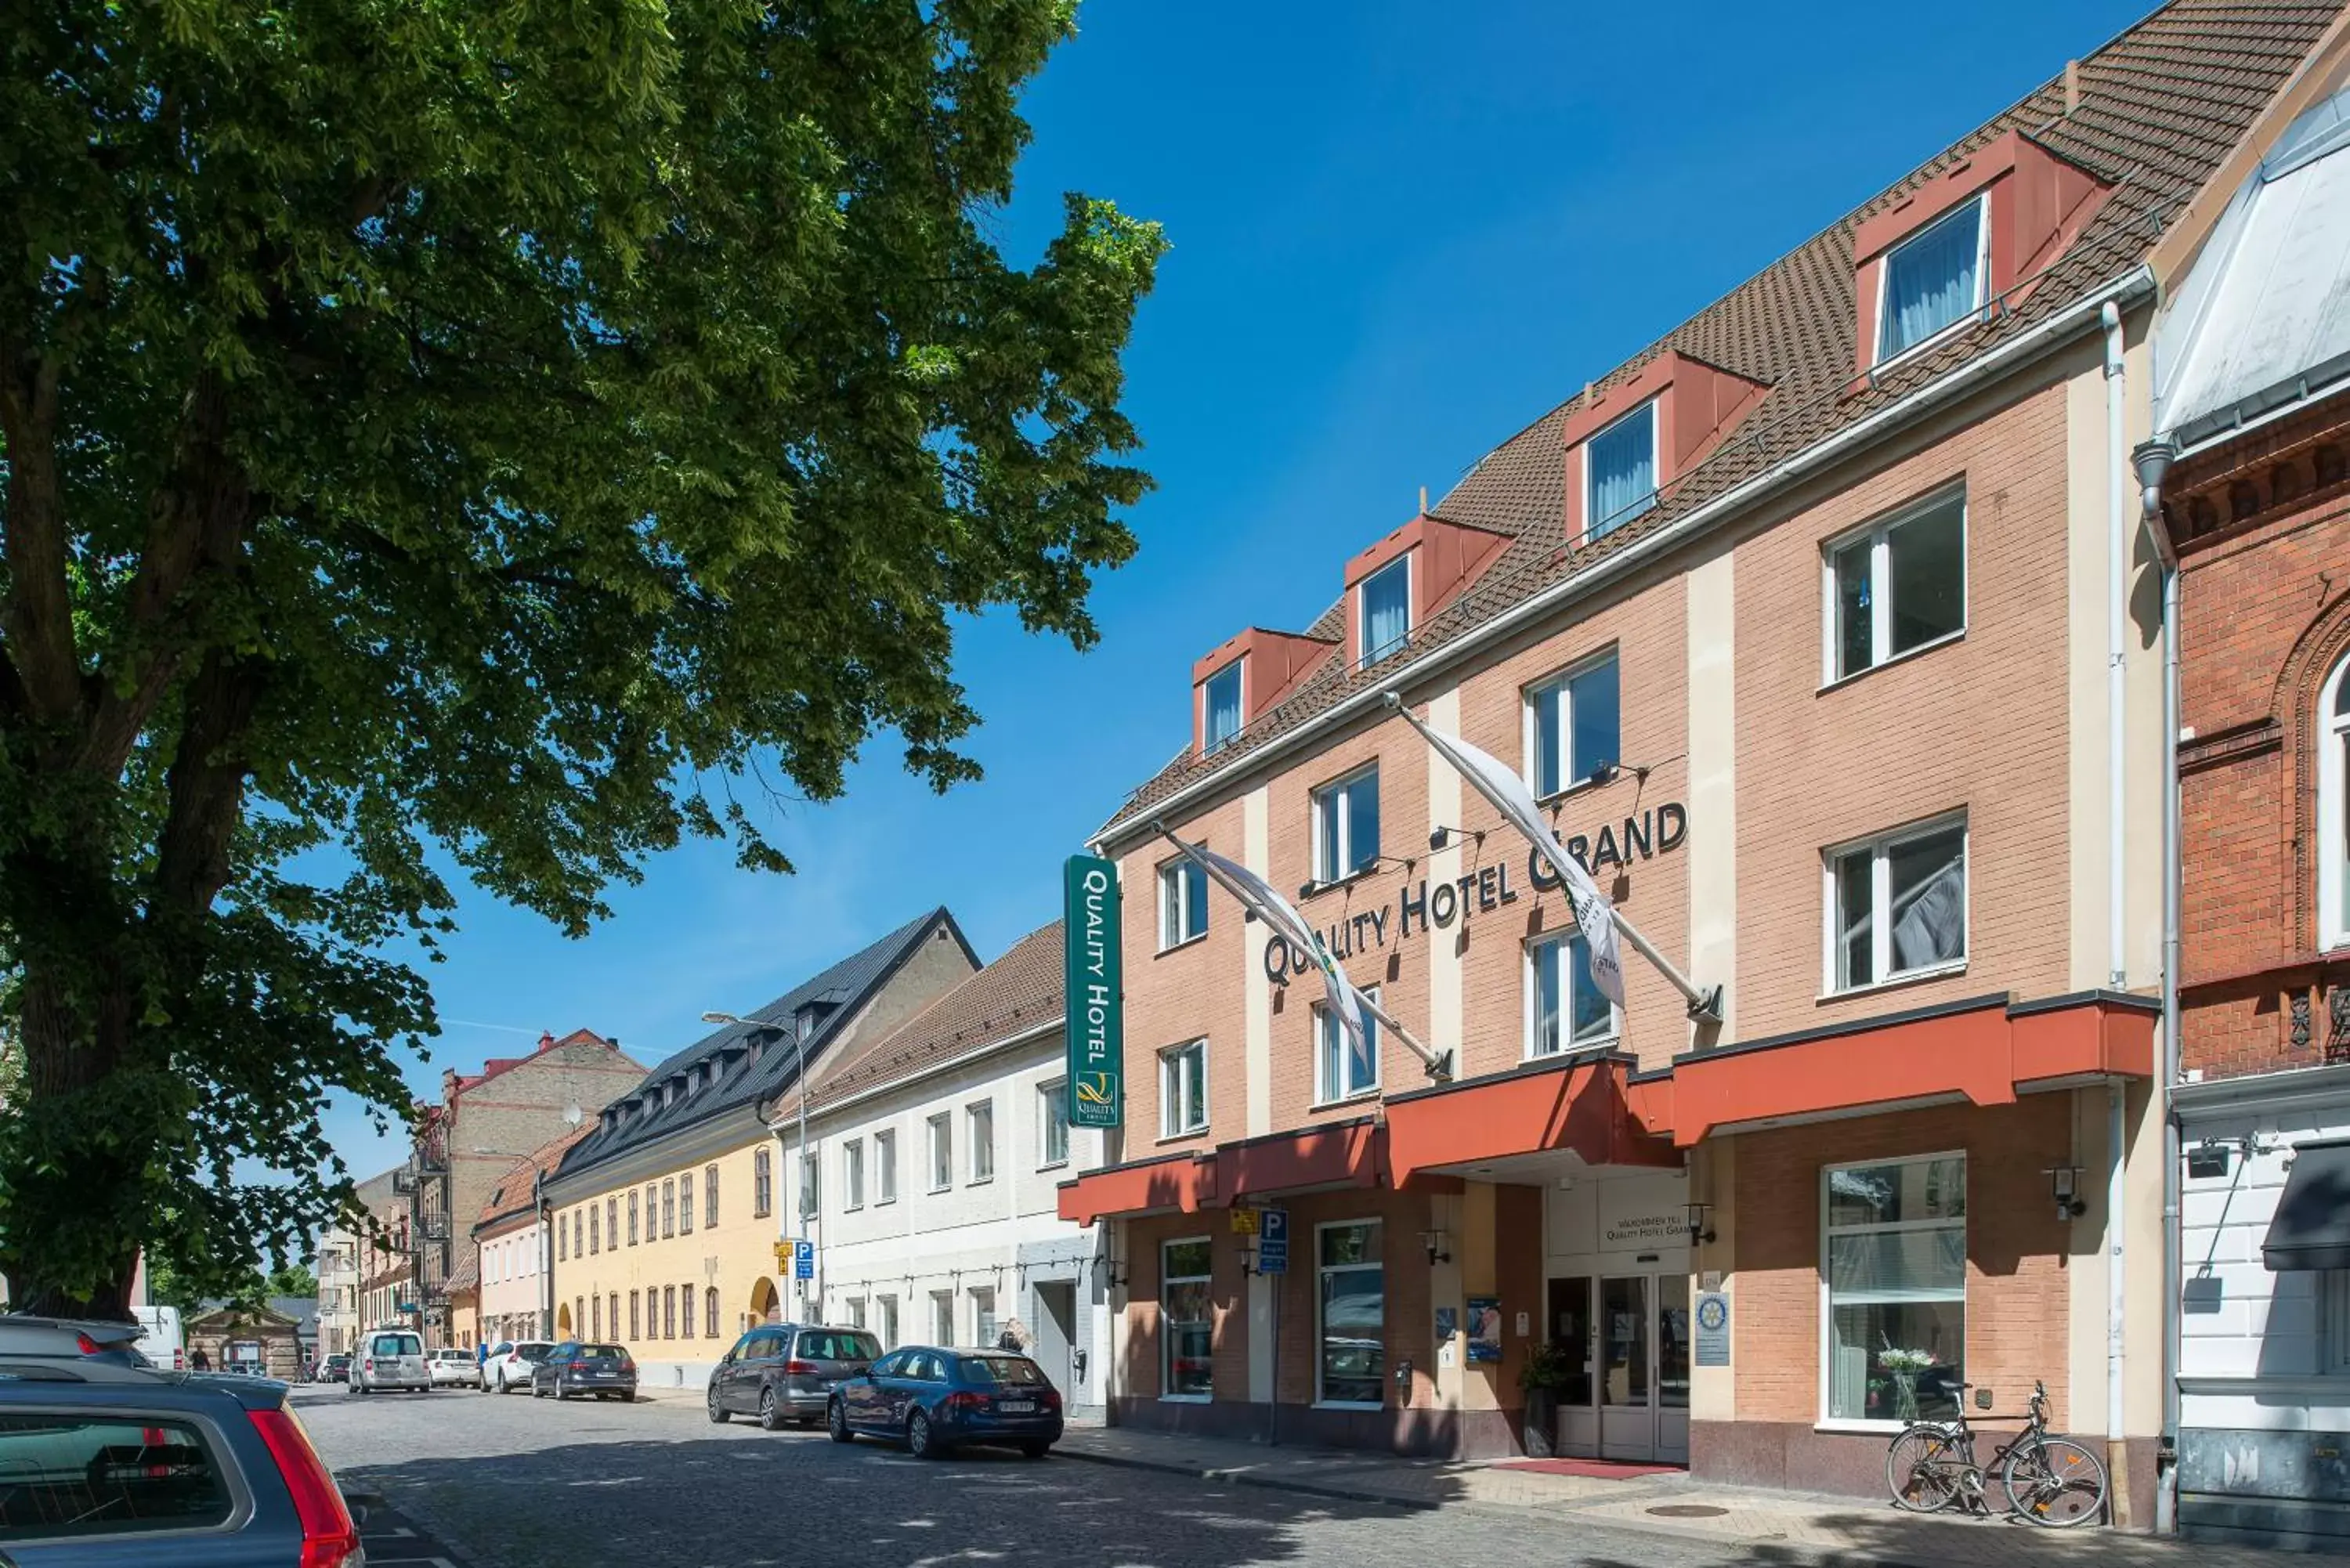 Facade/entrance, Property Building in Quality Hotel Grand Kristianstad